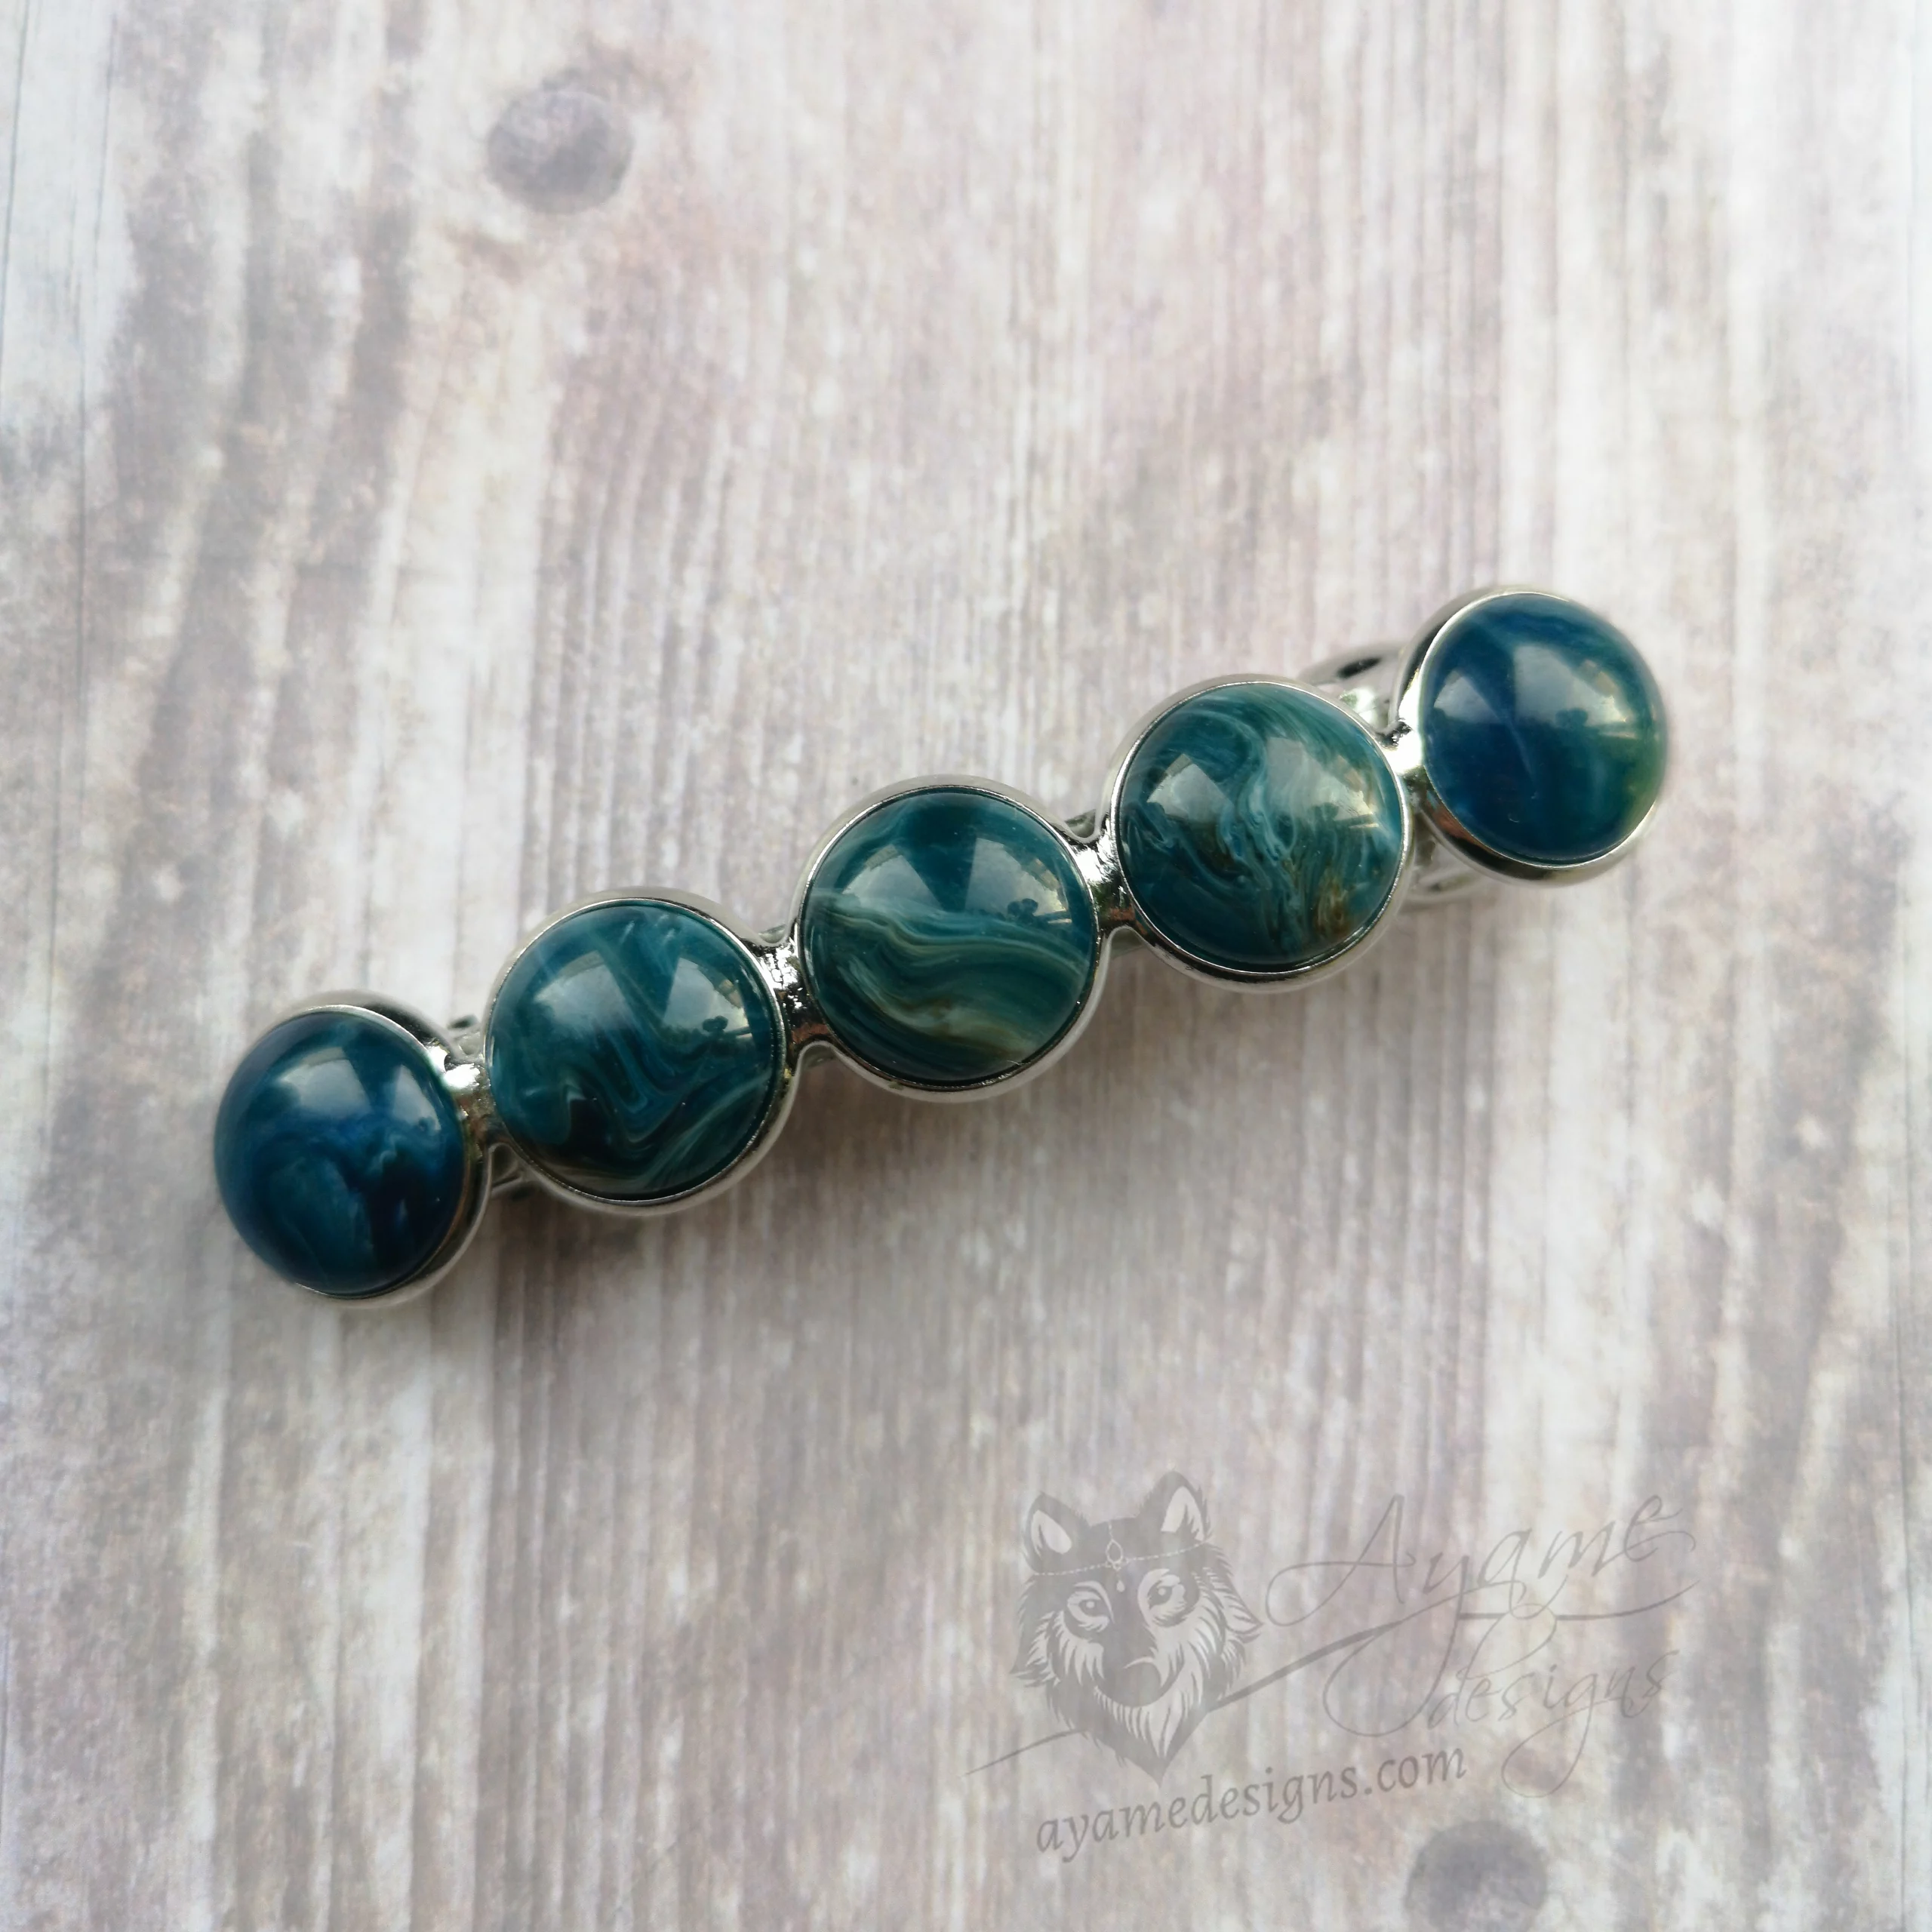 Hair barrette with blue marble swirl resin cabochons